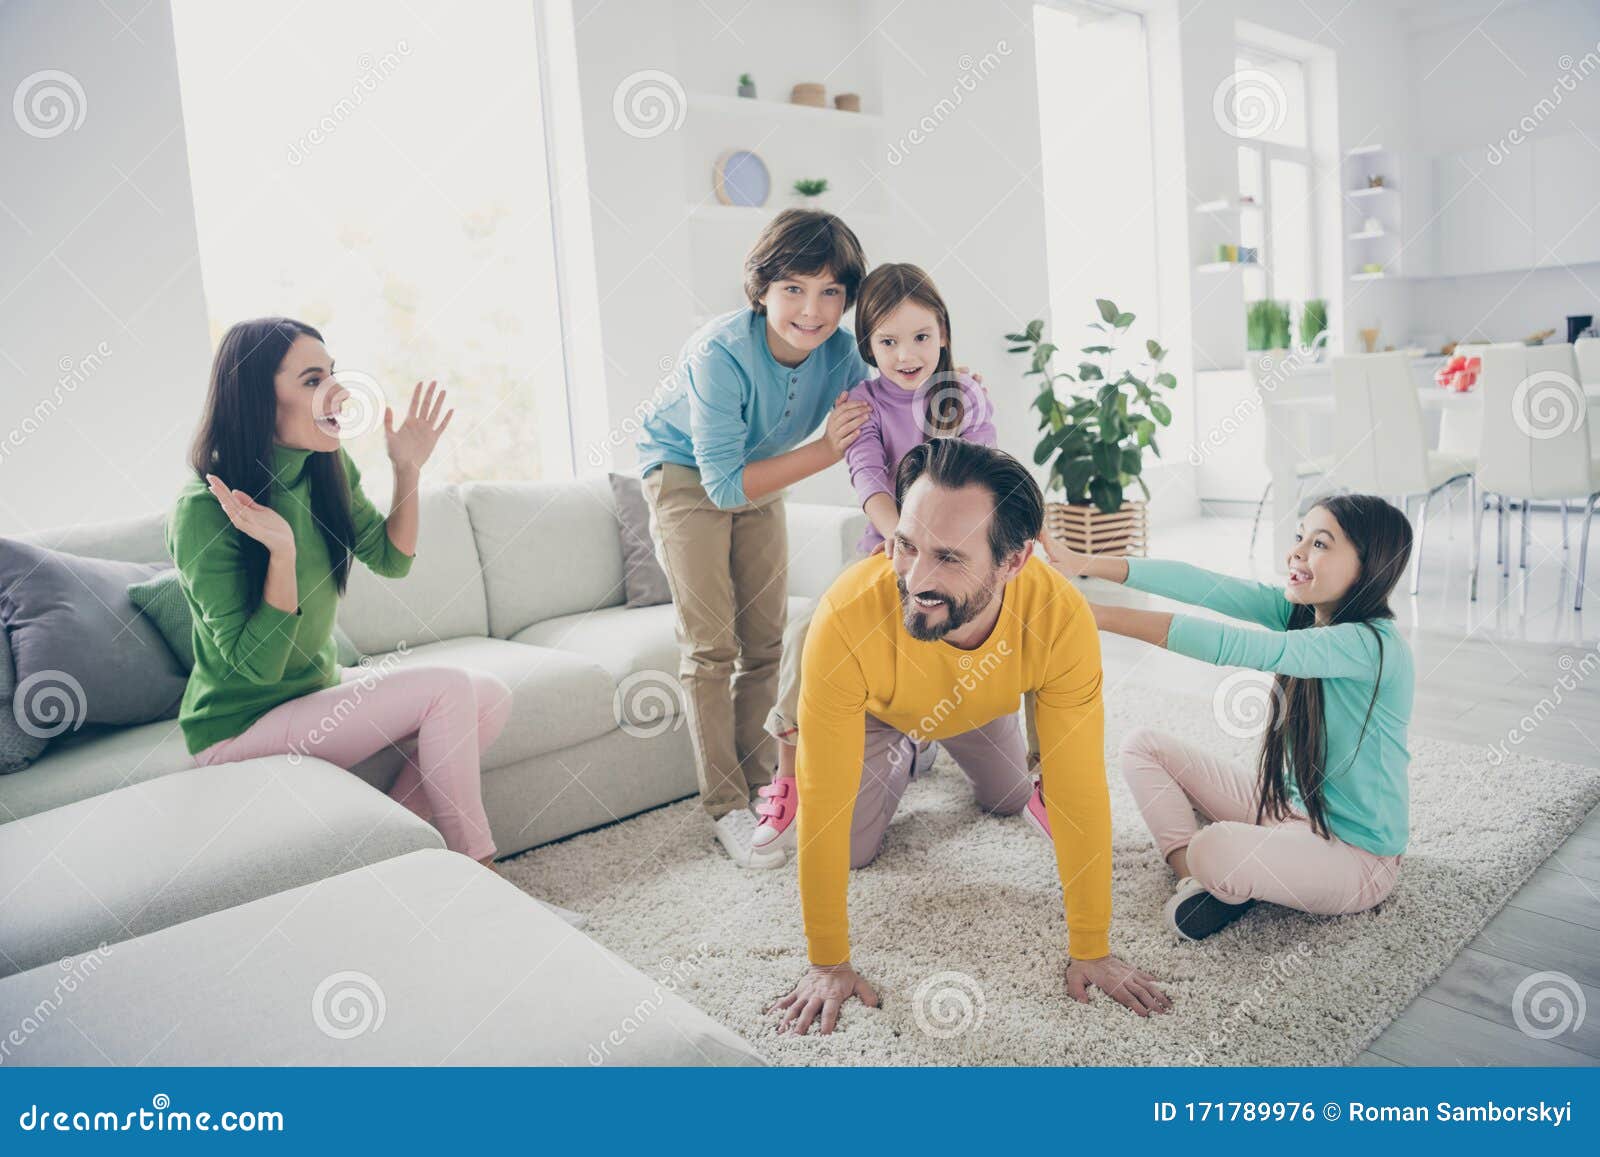 Nice Attractive Cheerful Humorous Adorable Family Three Pre Teen